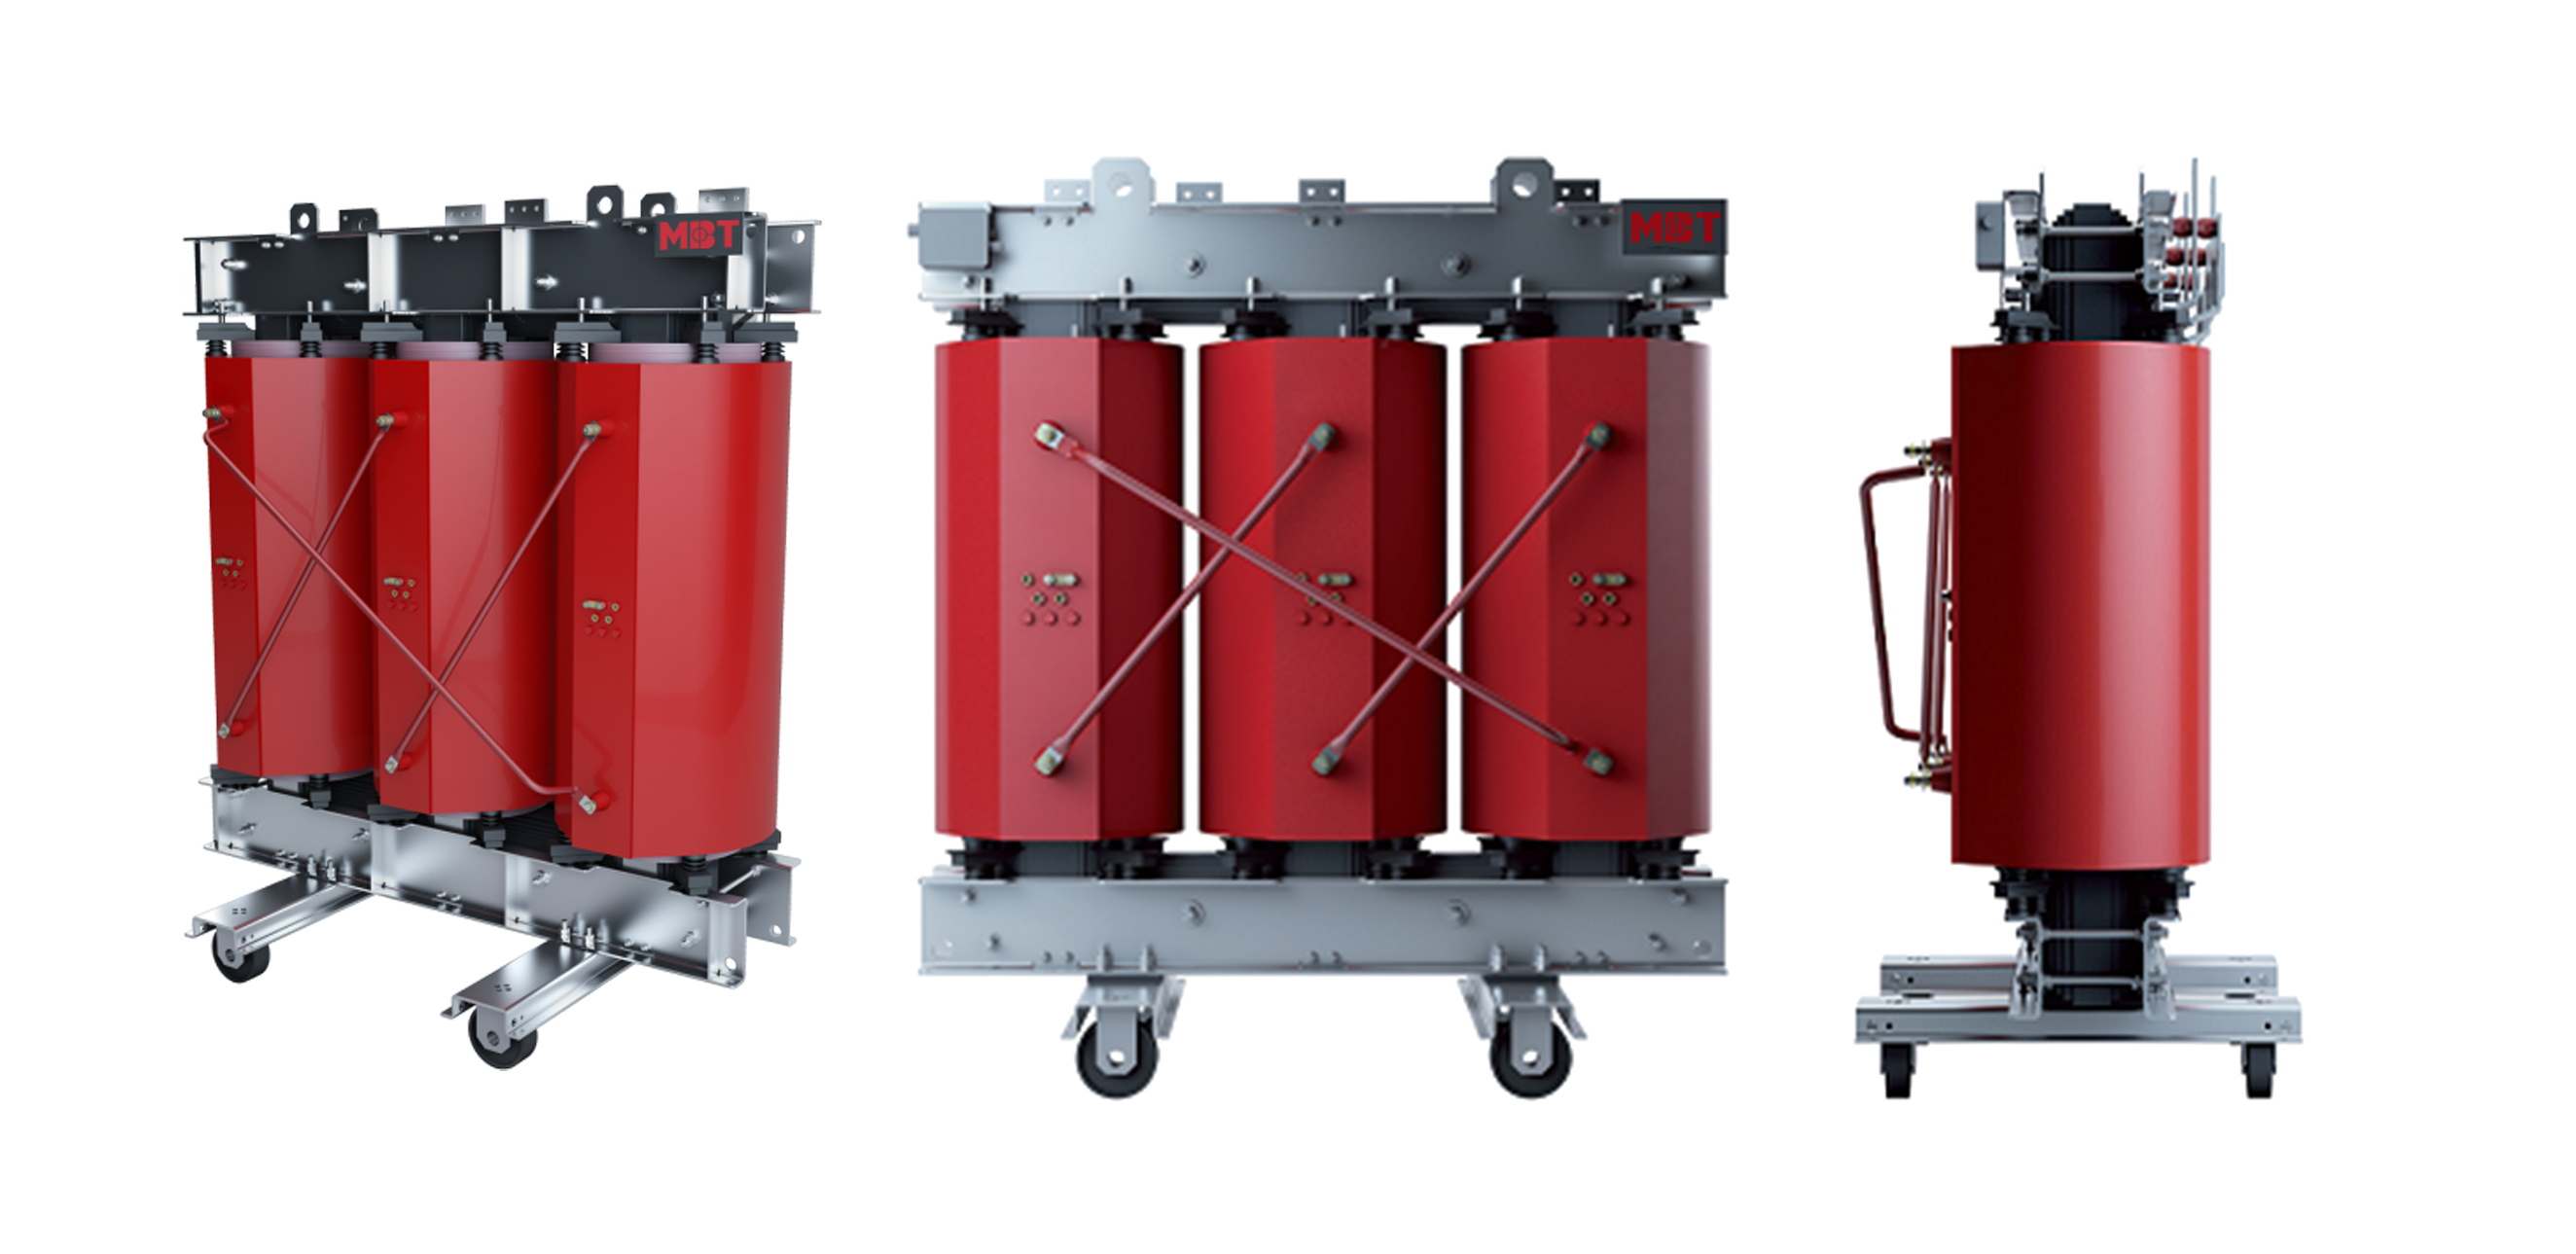 What is a dry transformer? Classification and applications of dry transformers